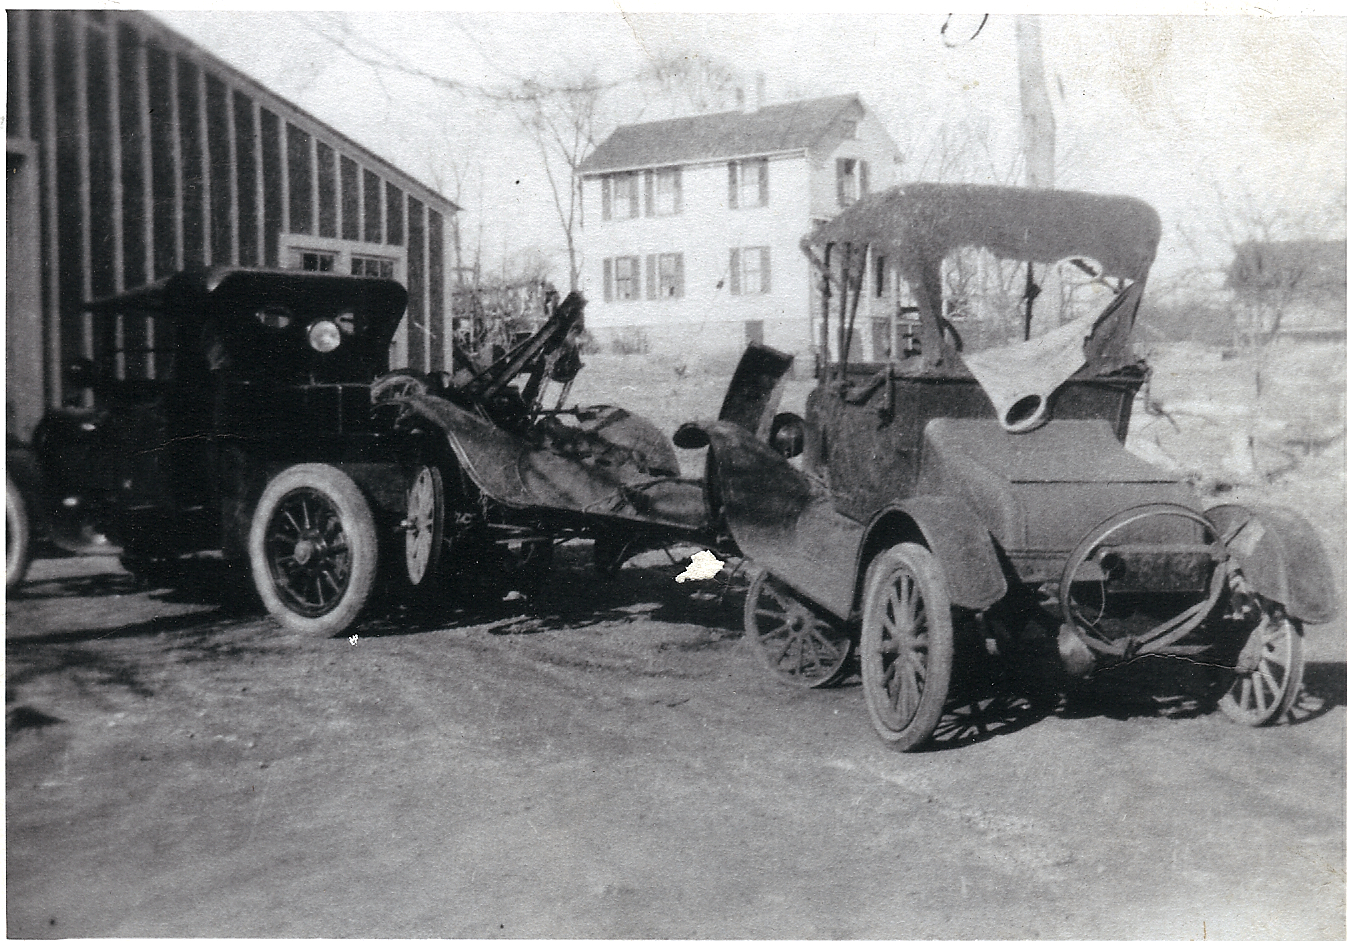 Brainerd's Garage, Stony Creek, CT. Our first wrecker, a 1911 Pope Hartford dragging in two very tired looking Model T Fords. Taken sometime in the early 1920's the garage looks the same today although we no longer do our own towing.